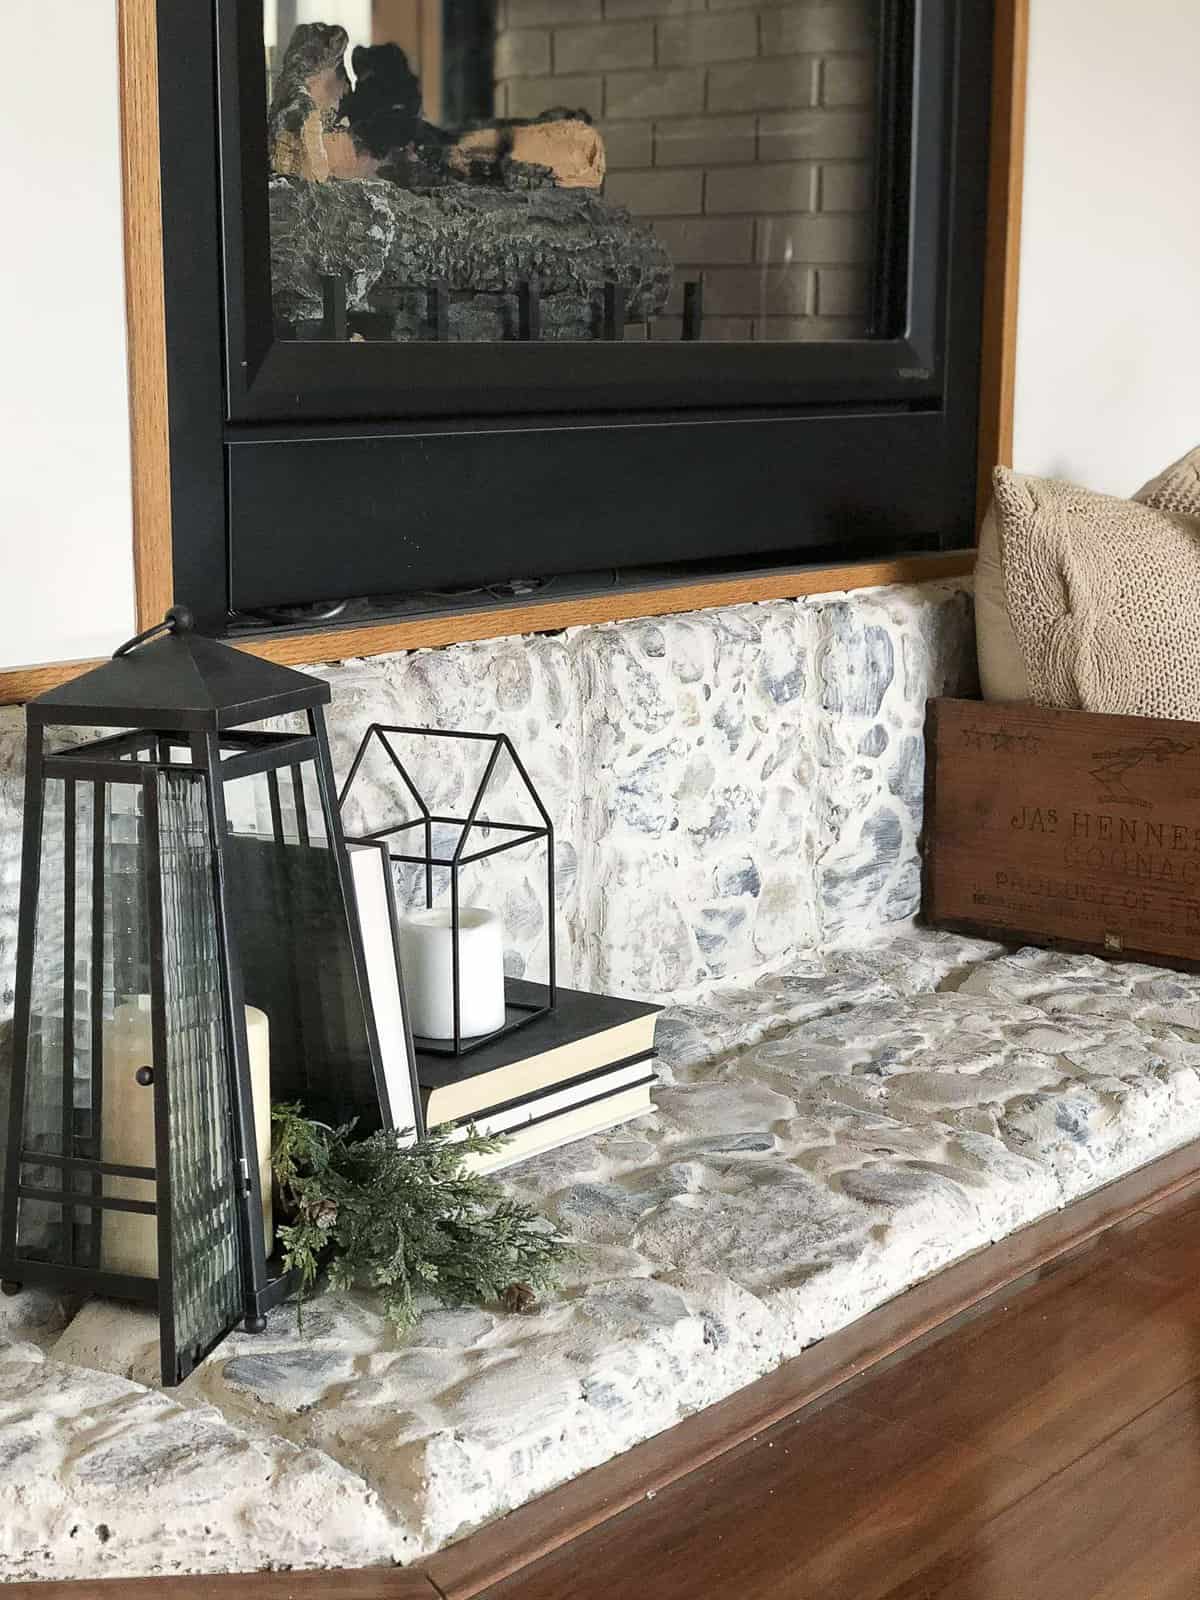 Are you looking for an easy way to update a river rock hearth? Try the german schmear technique to transform outdated rock to beautiful European country style. #germanschmear #fireplace #diyfireplace